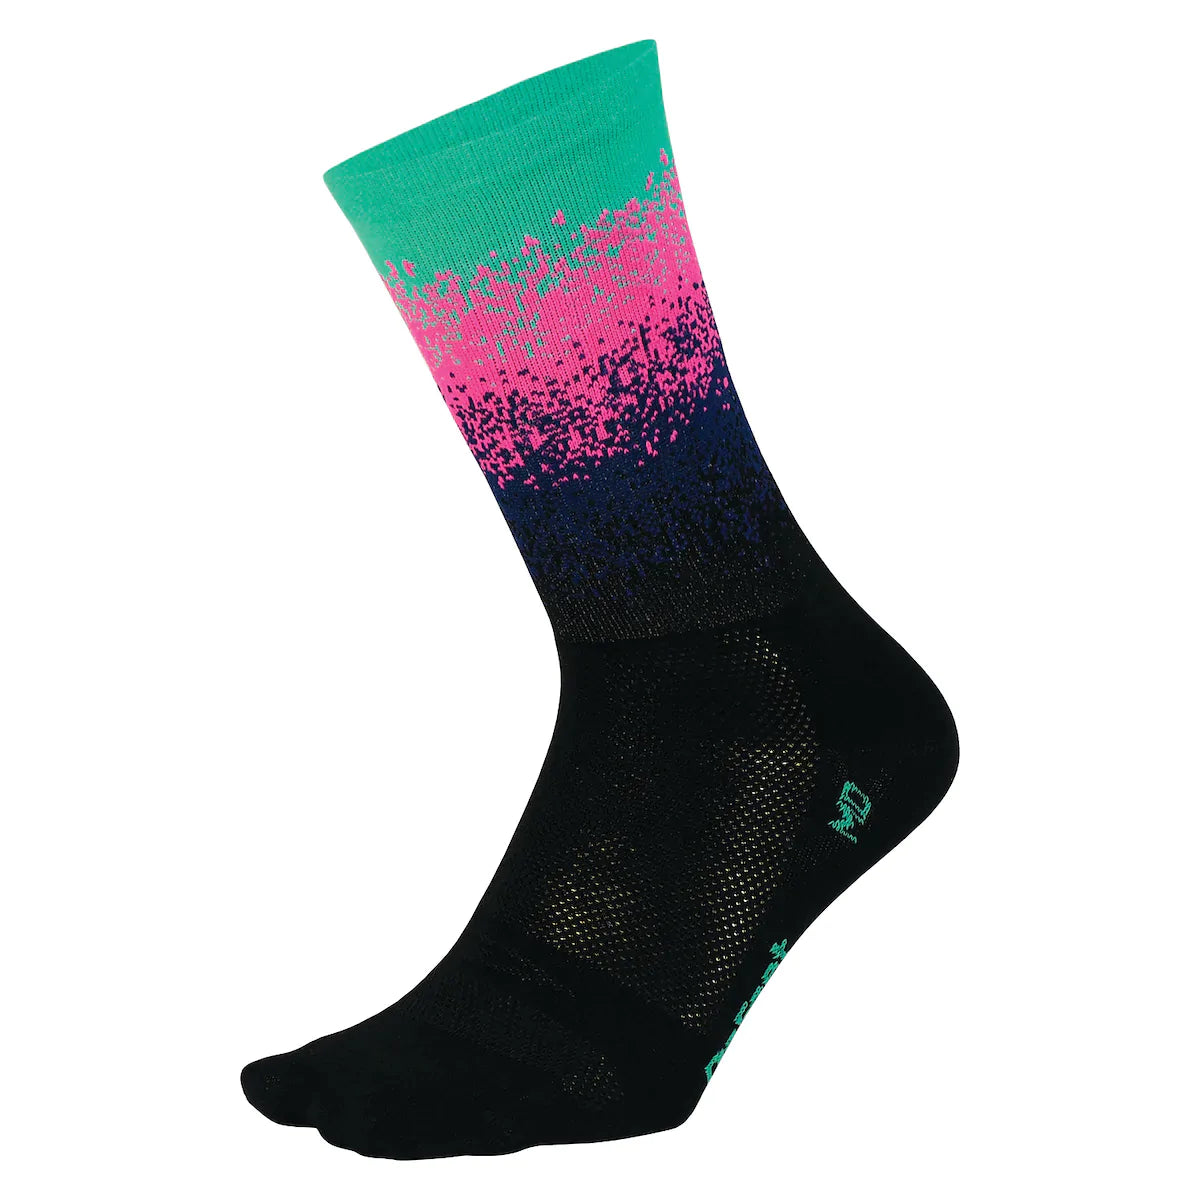 DeFeet Aireator Barnstormer Ombre cycling sock featuring a 6" cuff and a design of bands of color fading from black to pink to green.